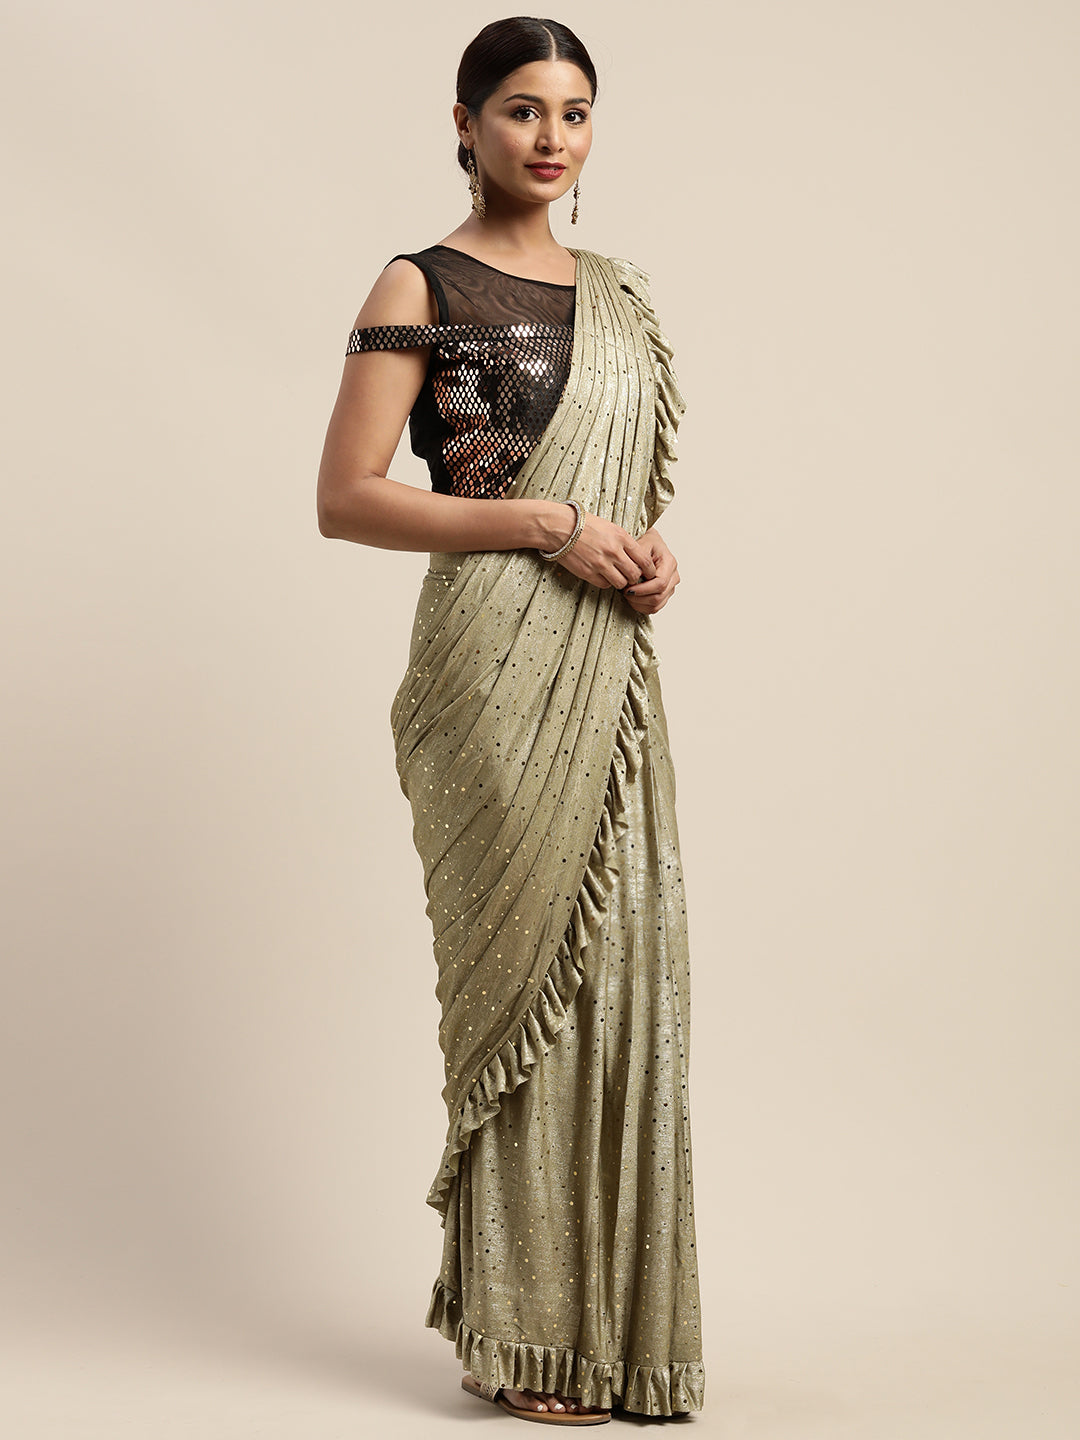 Neerus Olive Color Viscose Rayon Fabric Drape Saree, With Stitched Blouse